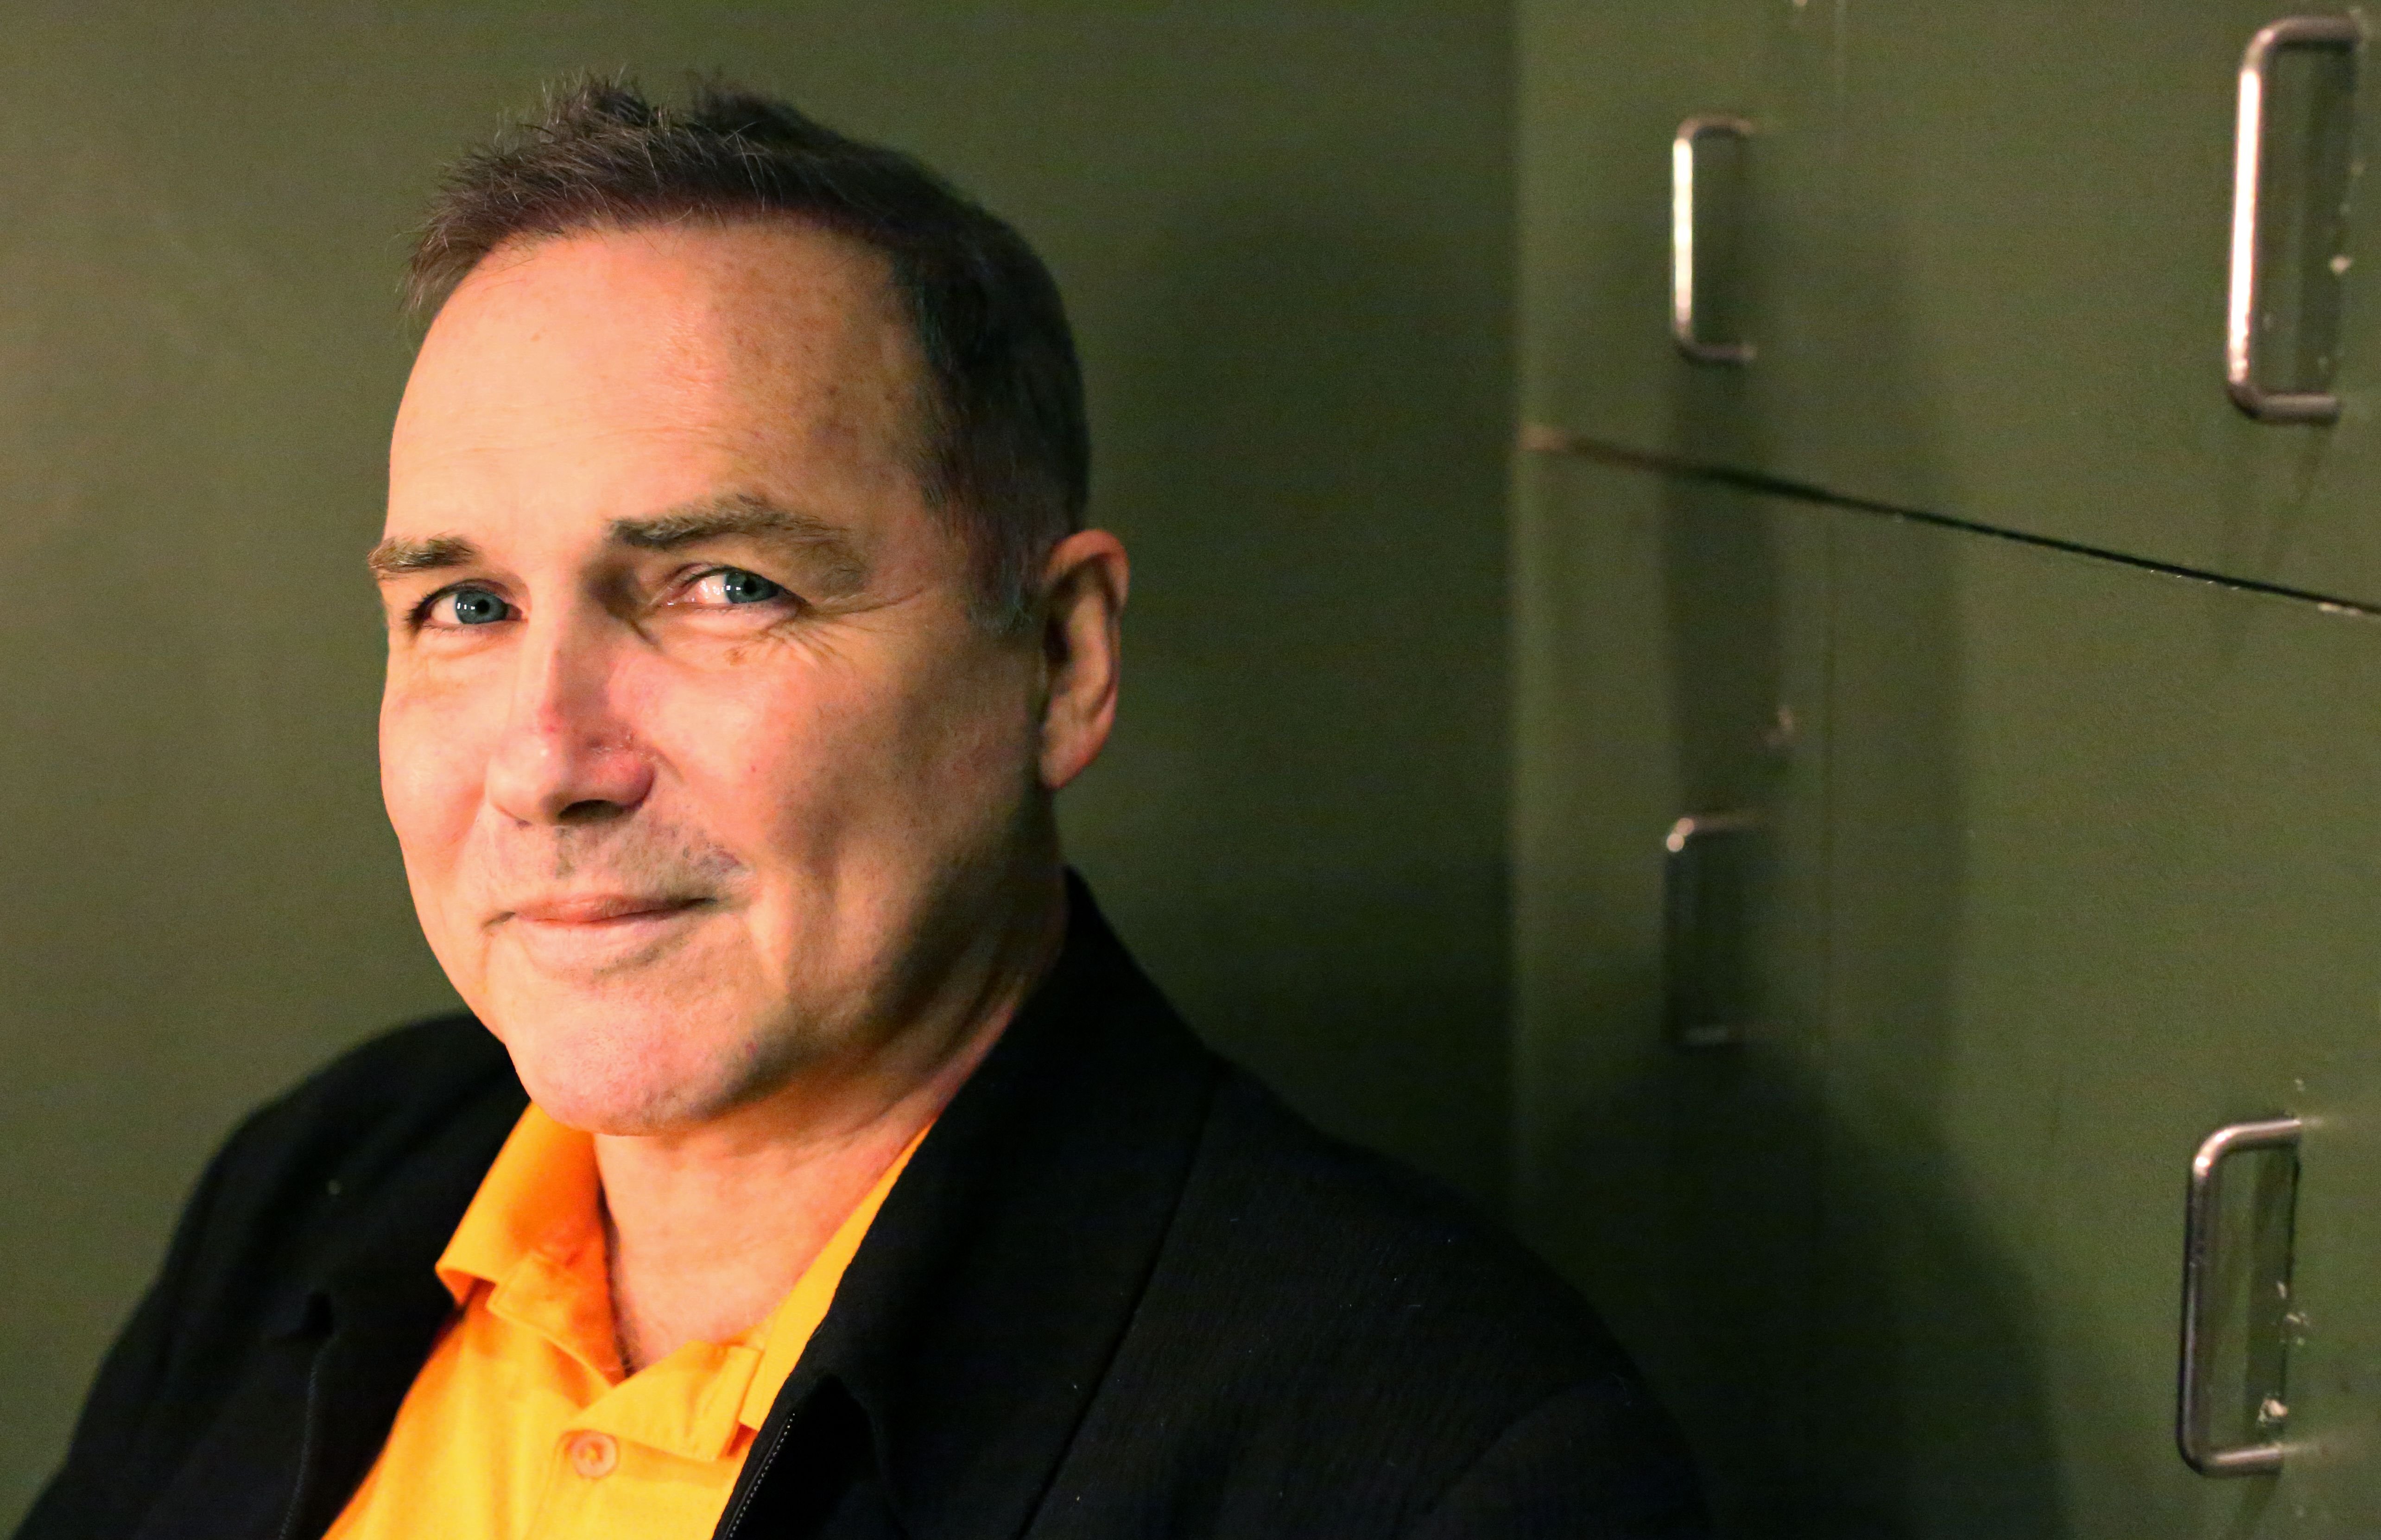 Comedian Norm MacDonald posed for a portrait while preparing to perform at Carolines on November 13, 2015 | Photo: Getty Images